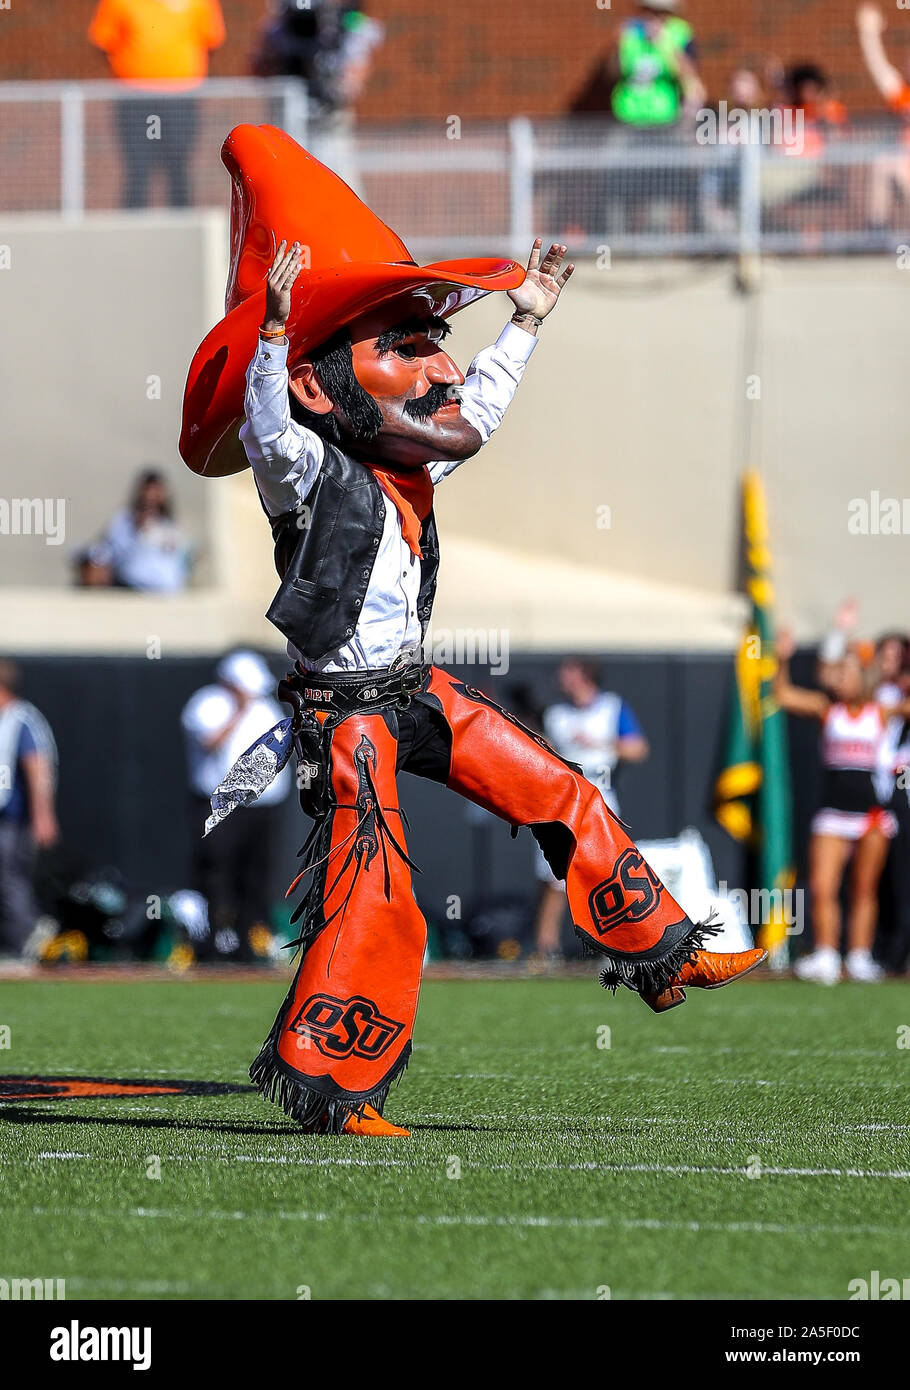 Pistol Pete at 60: Facts behind the Face of OSU